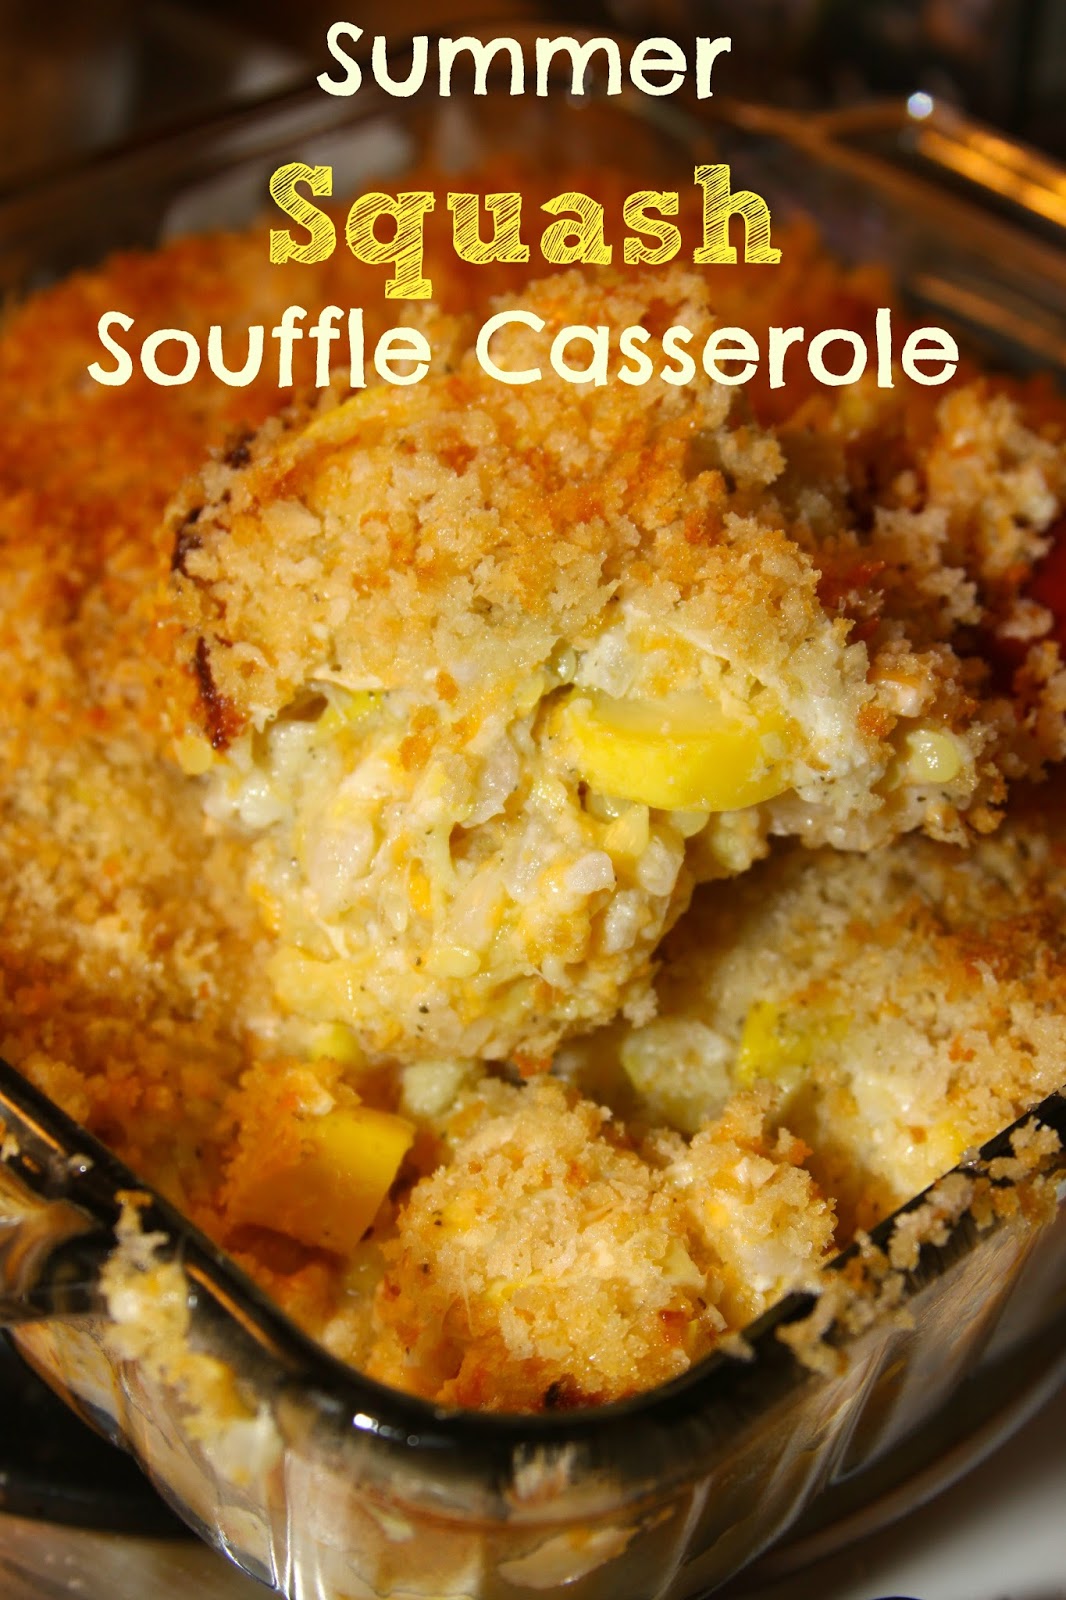 For the Love of Food: Summer Squash Souffle Casserole